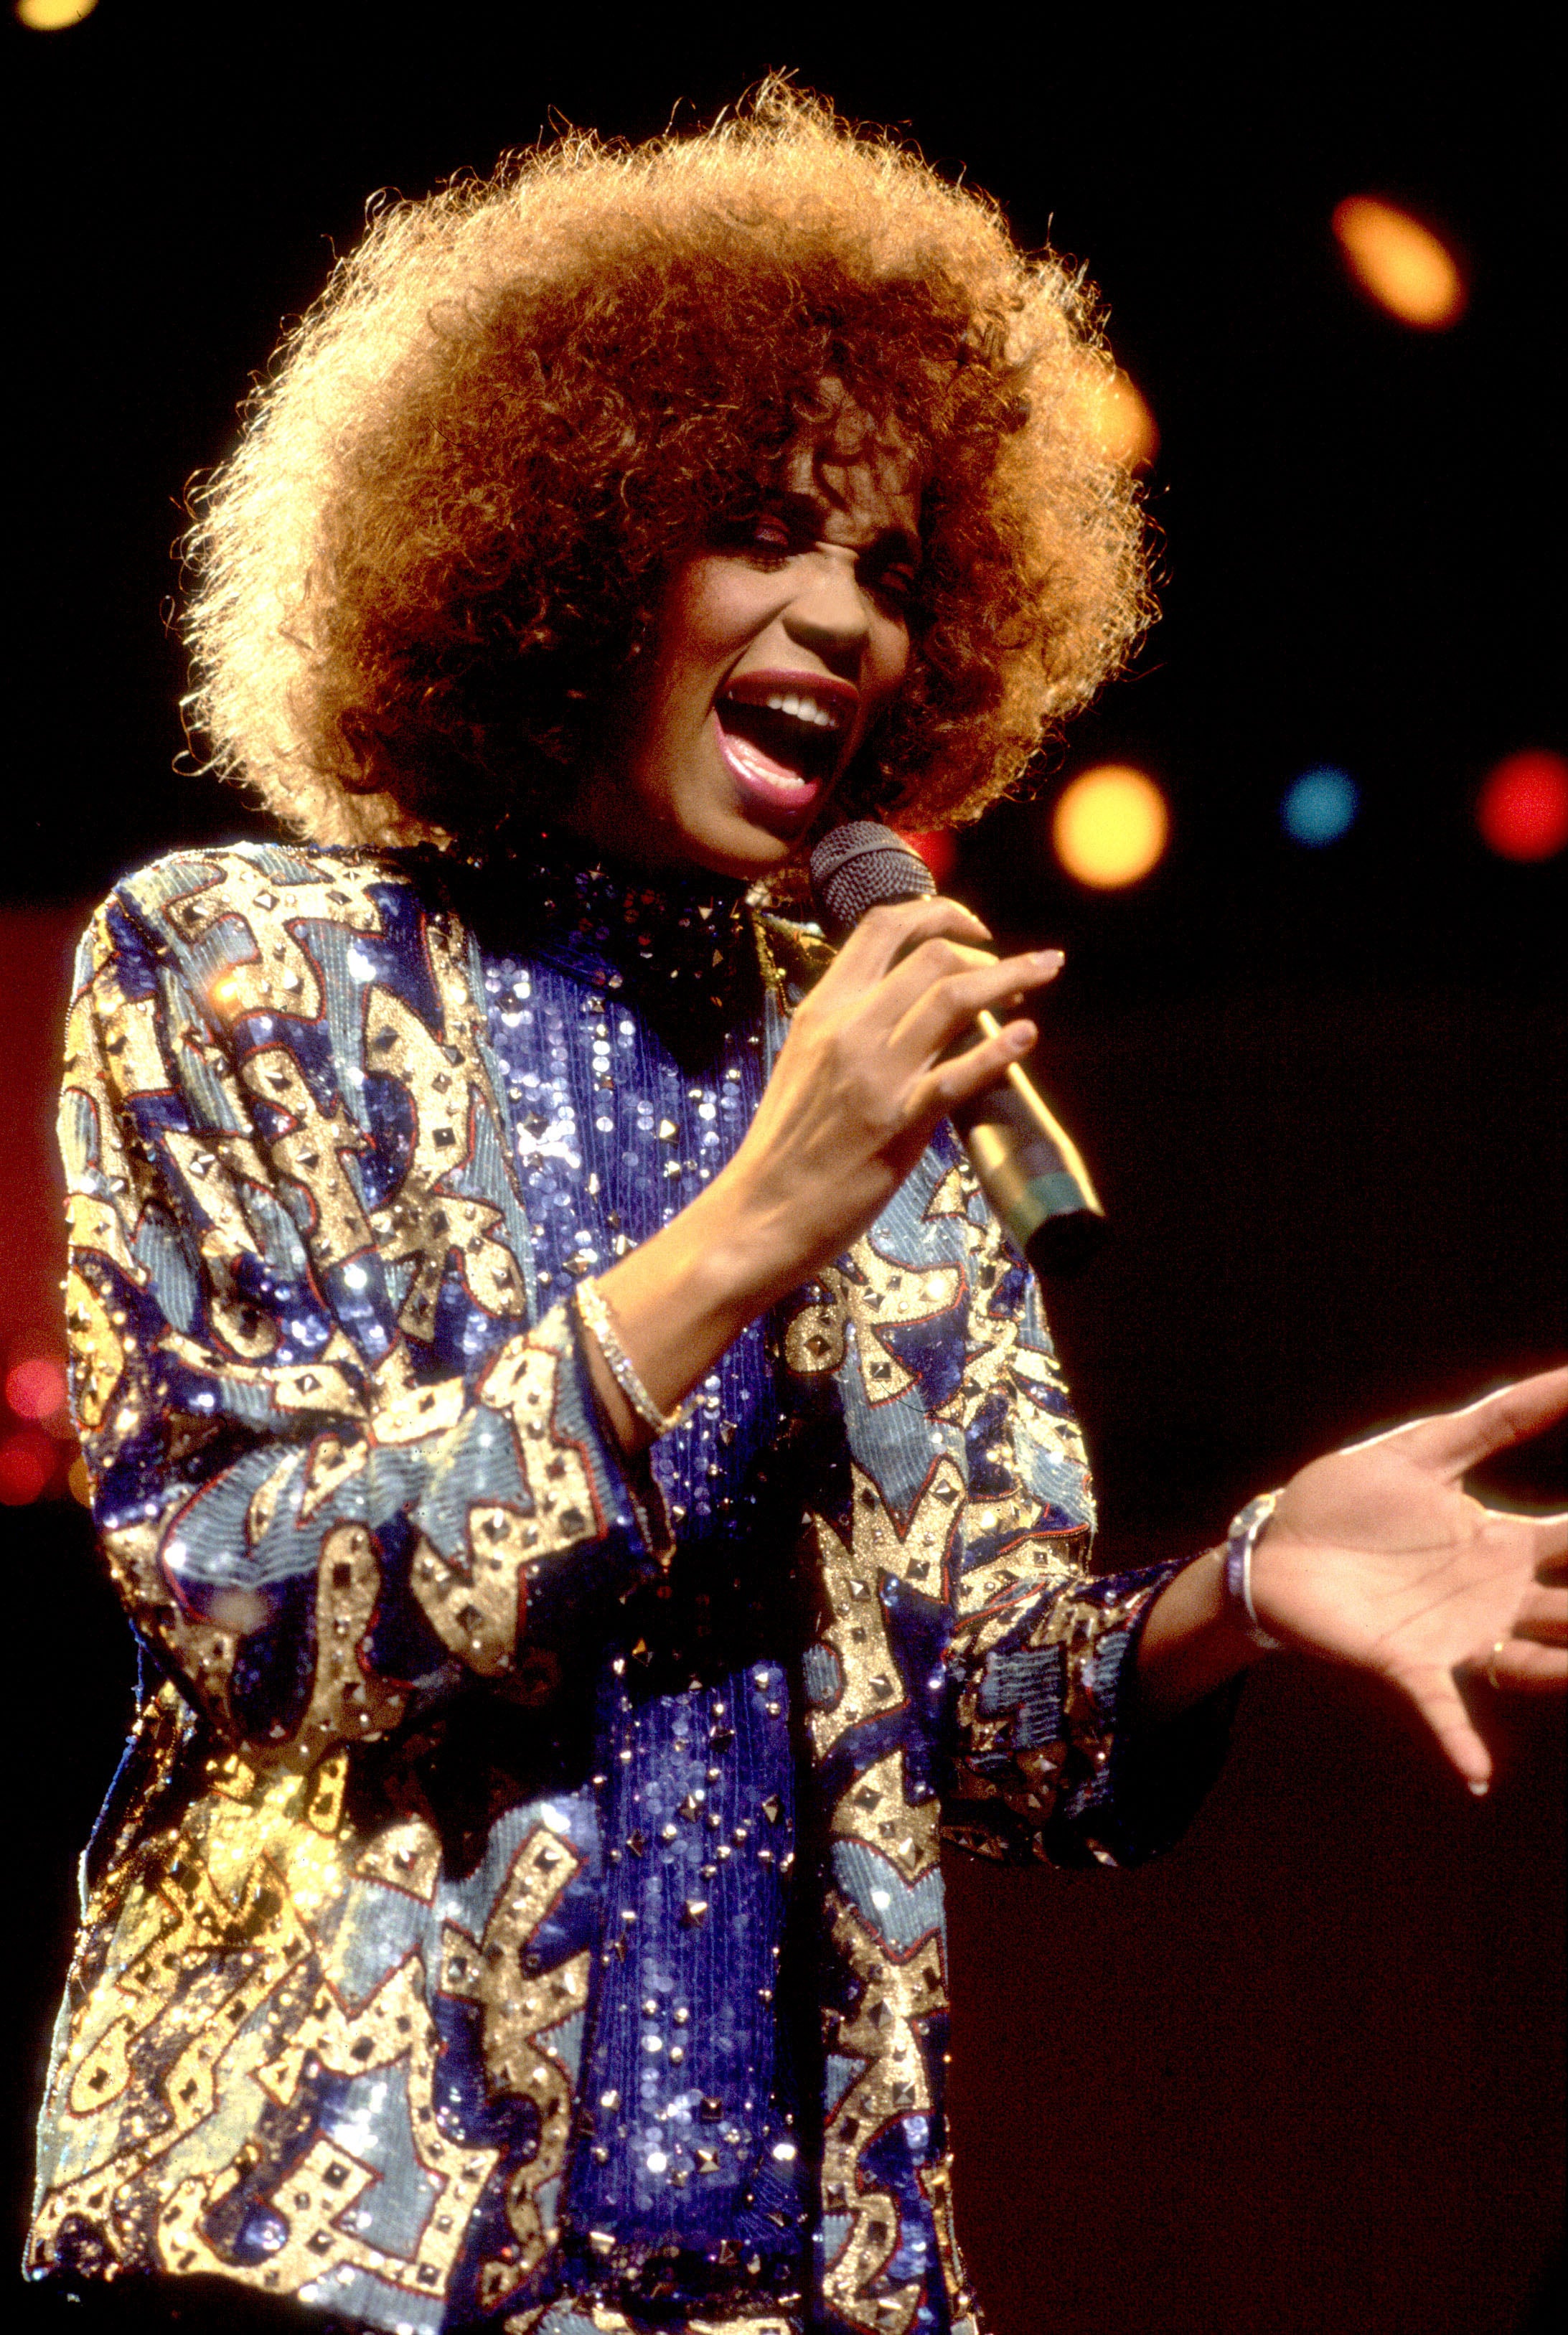 In The New 'Whitney' Documentary, Viewers Learn Heartbreaking And Controversial Details Of Houston's Life